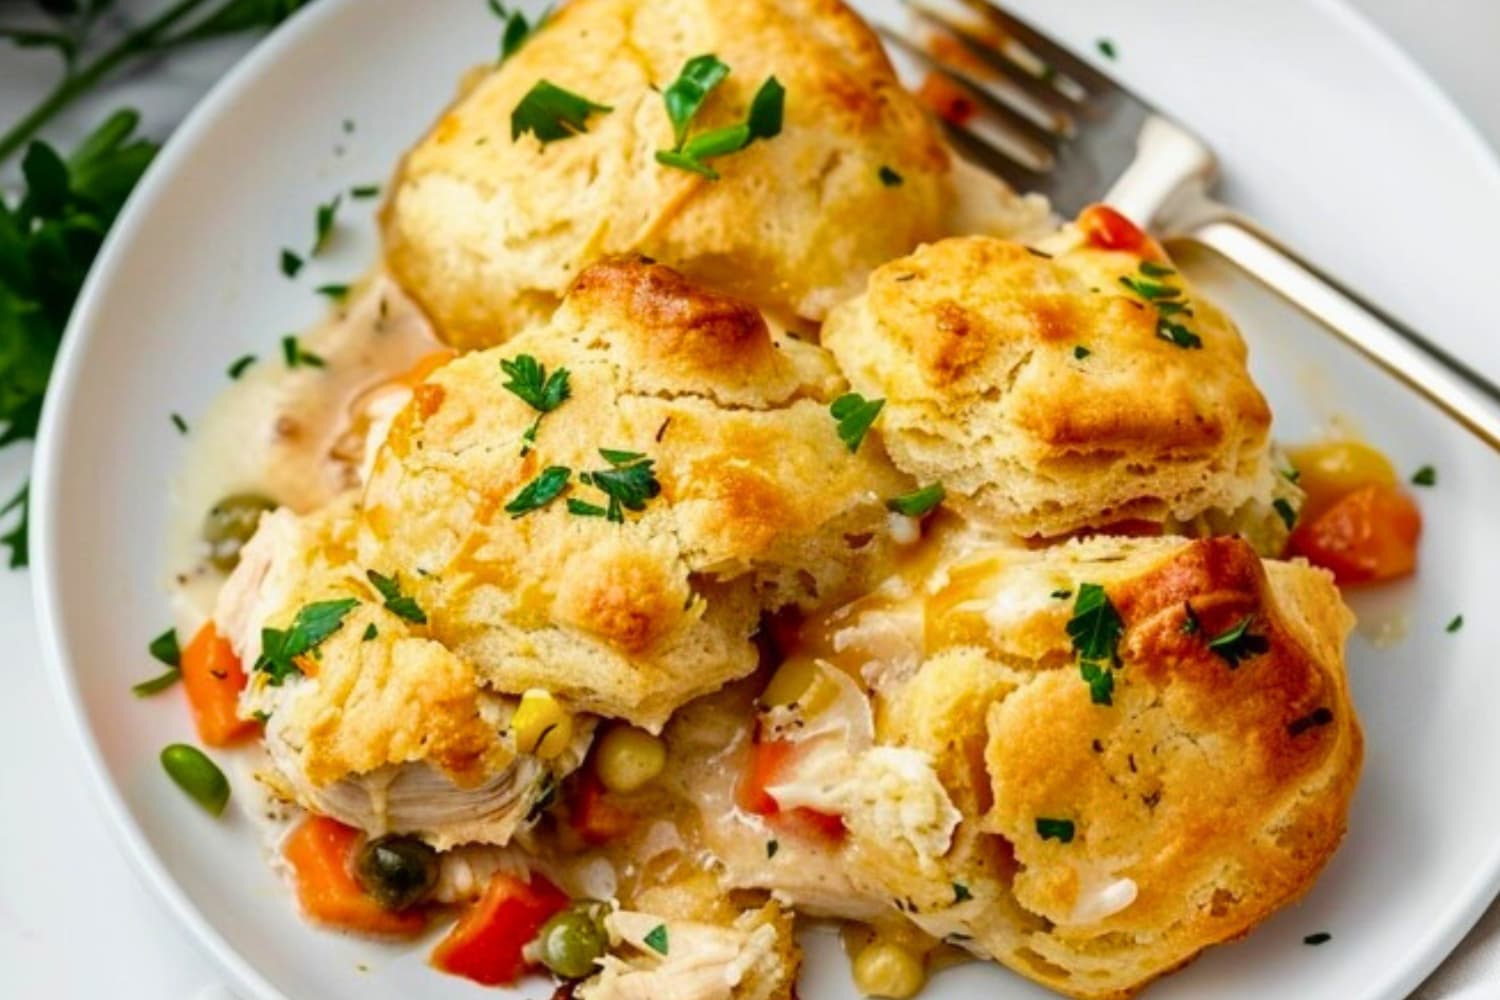 Serving of chicken and biscuit casserole in a white plate with fork in the side.